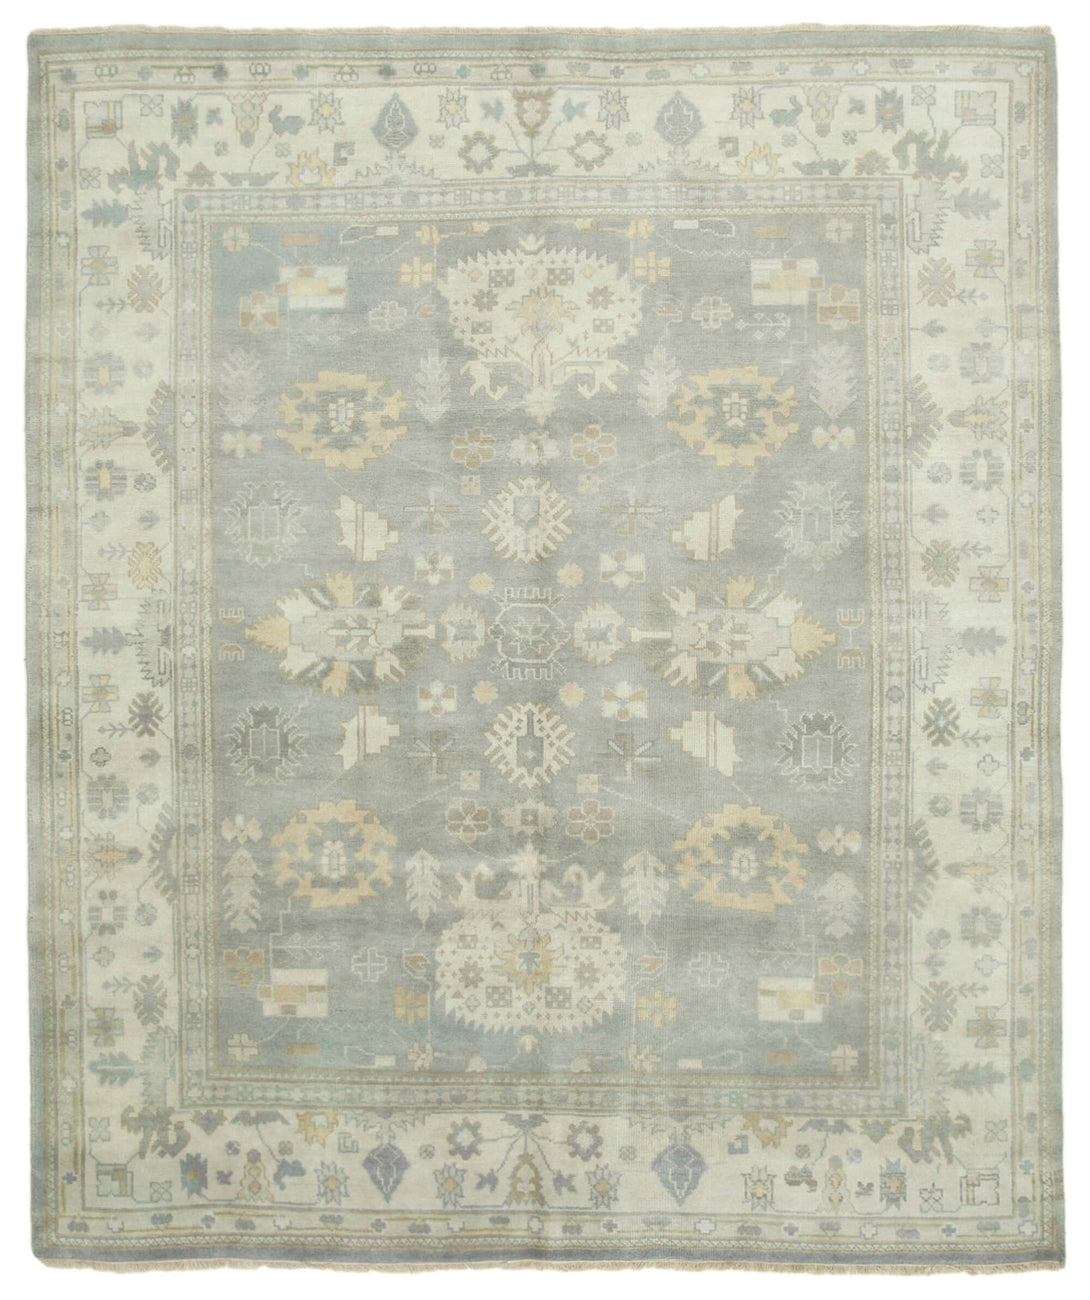 Handmade Oushak Area Rug > Design# OL-AC-38462 > Size: 8'-2" x 9'-11", Carpet Culture Rugs, Handmade Rugs, NYC Rugs, New Rugs, Shop Rugs, Rug Store, Outlet Rugs, SoHo Rugs, Rugs in USA